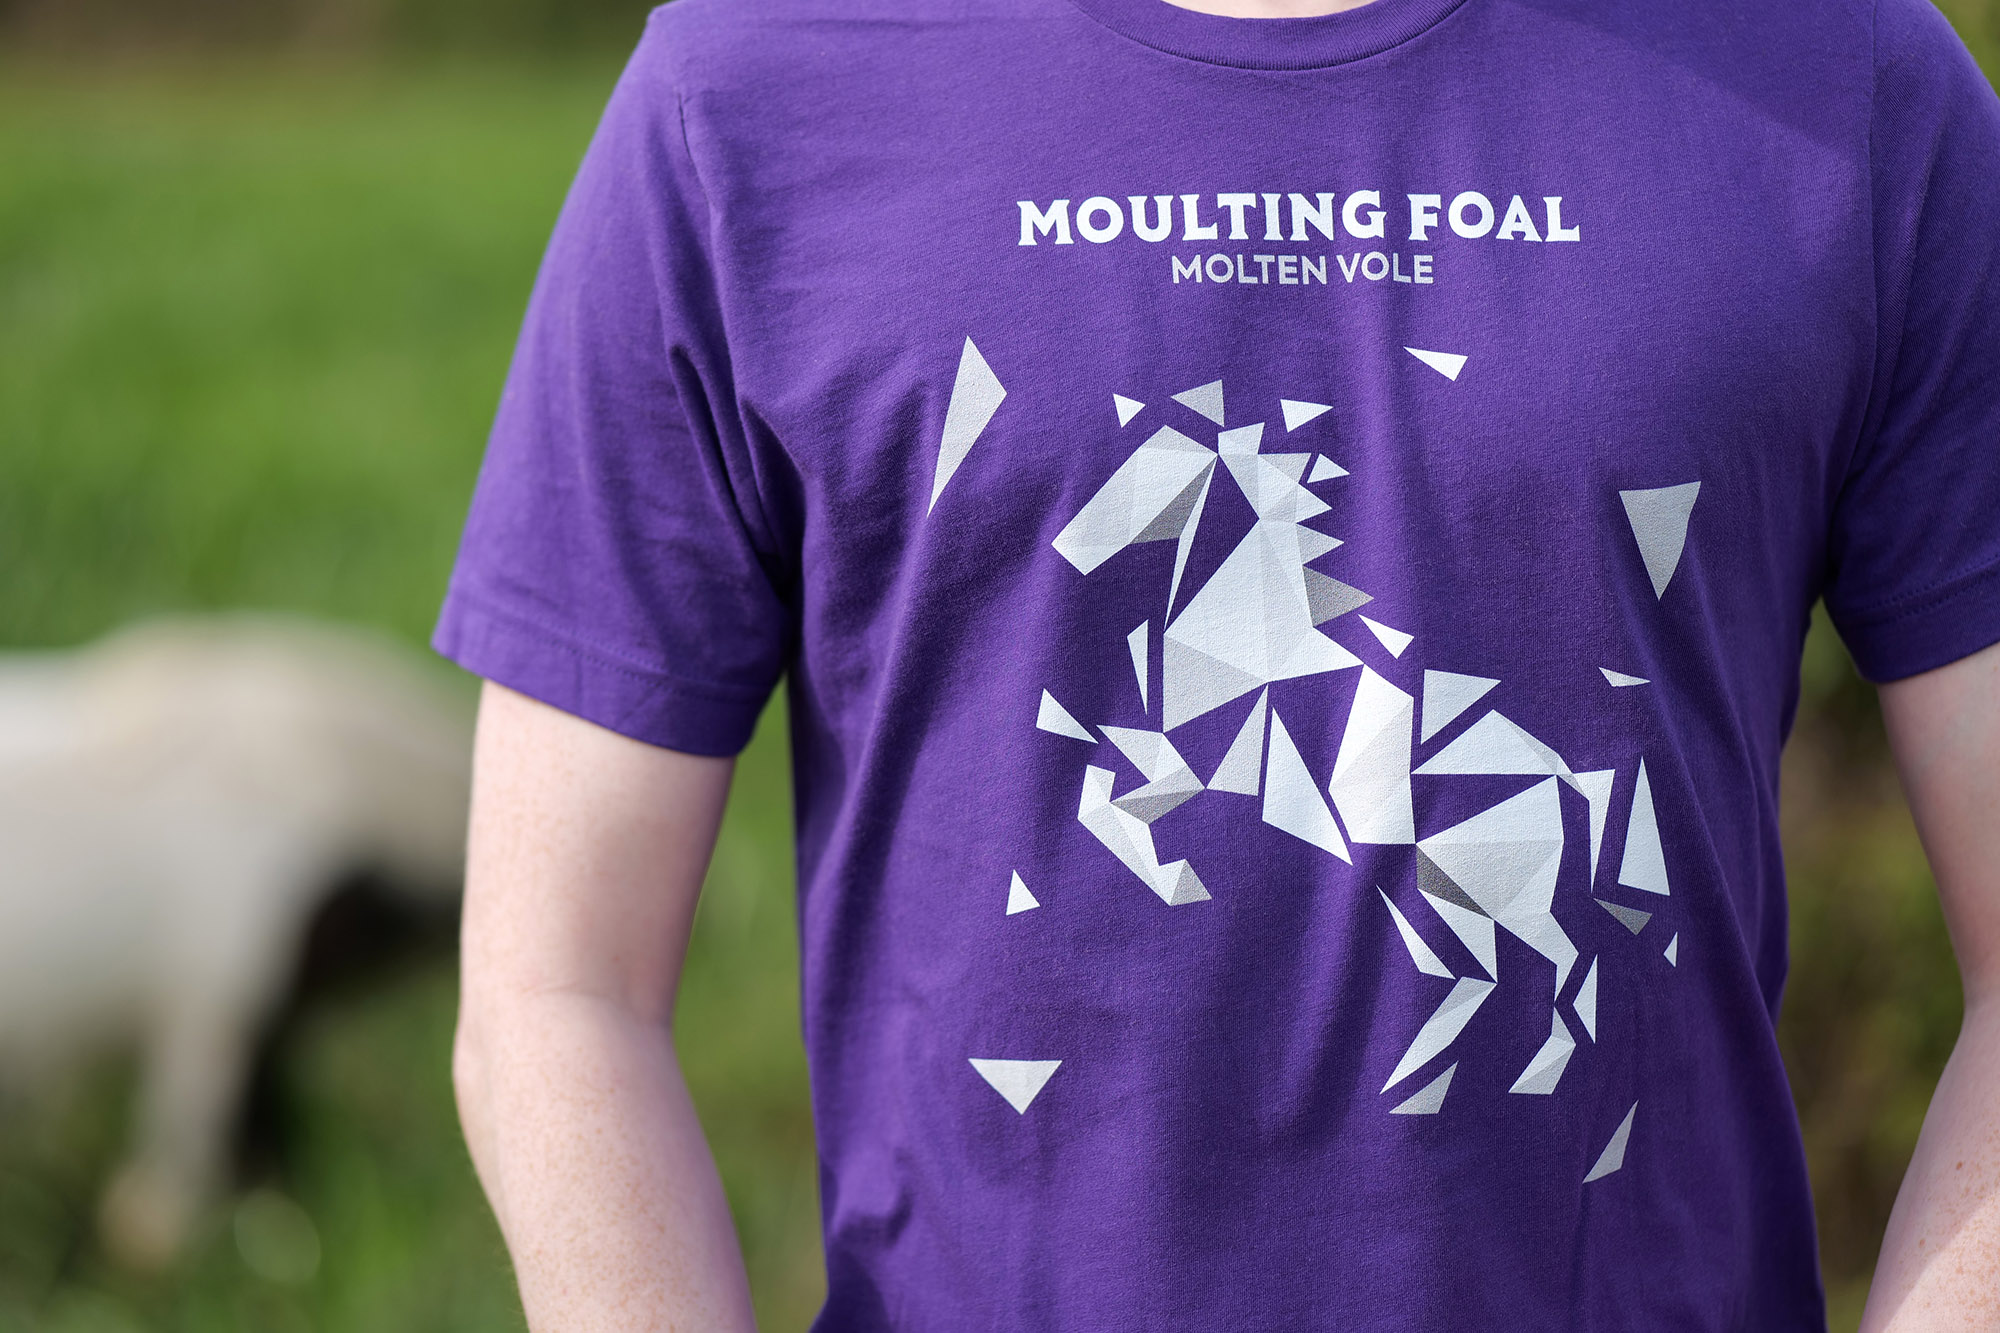 Moulting Foal tee photo 2